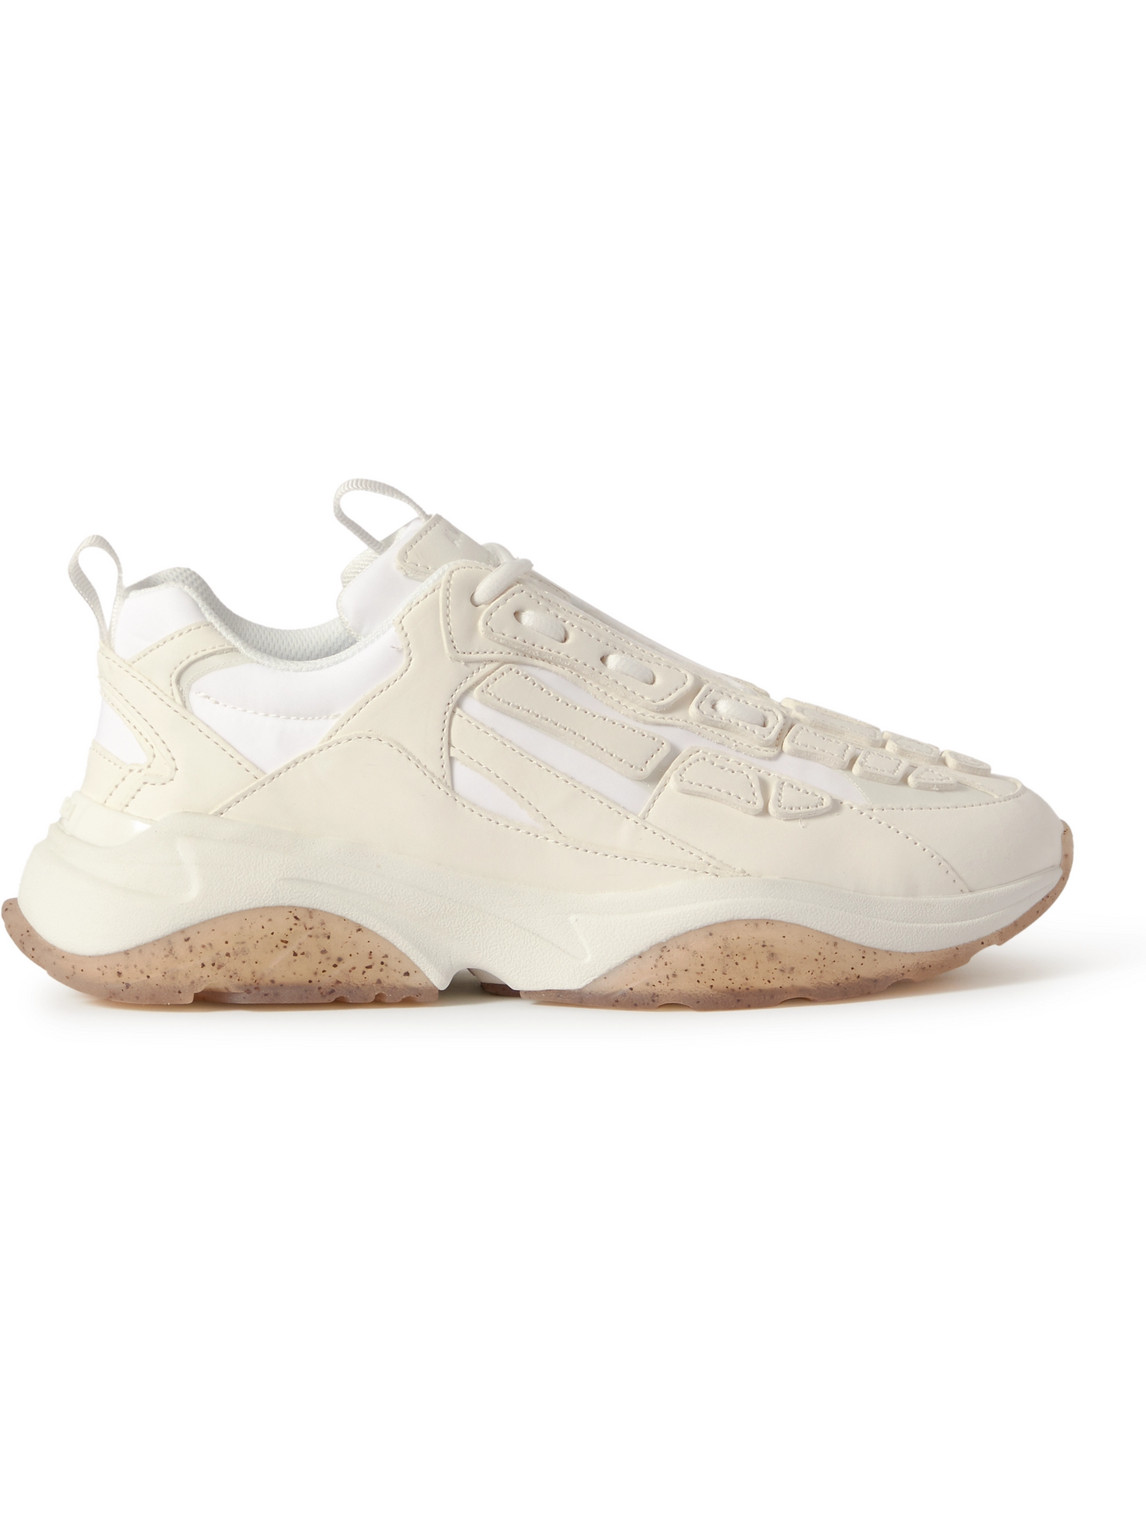 Bone Runner Leather and Suede-Trimmed Canvas Sneakers